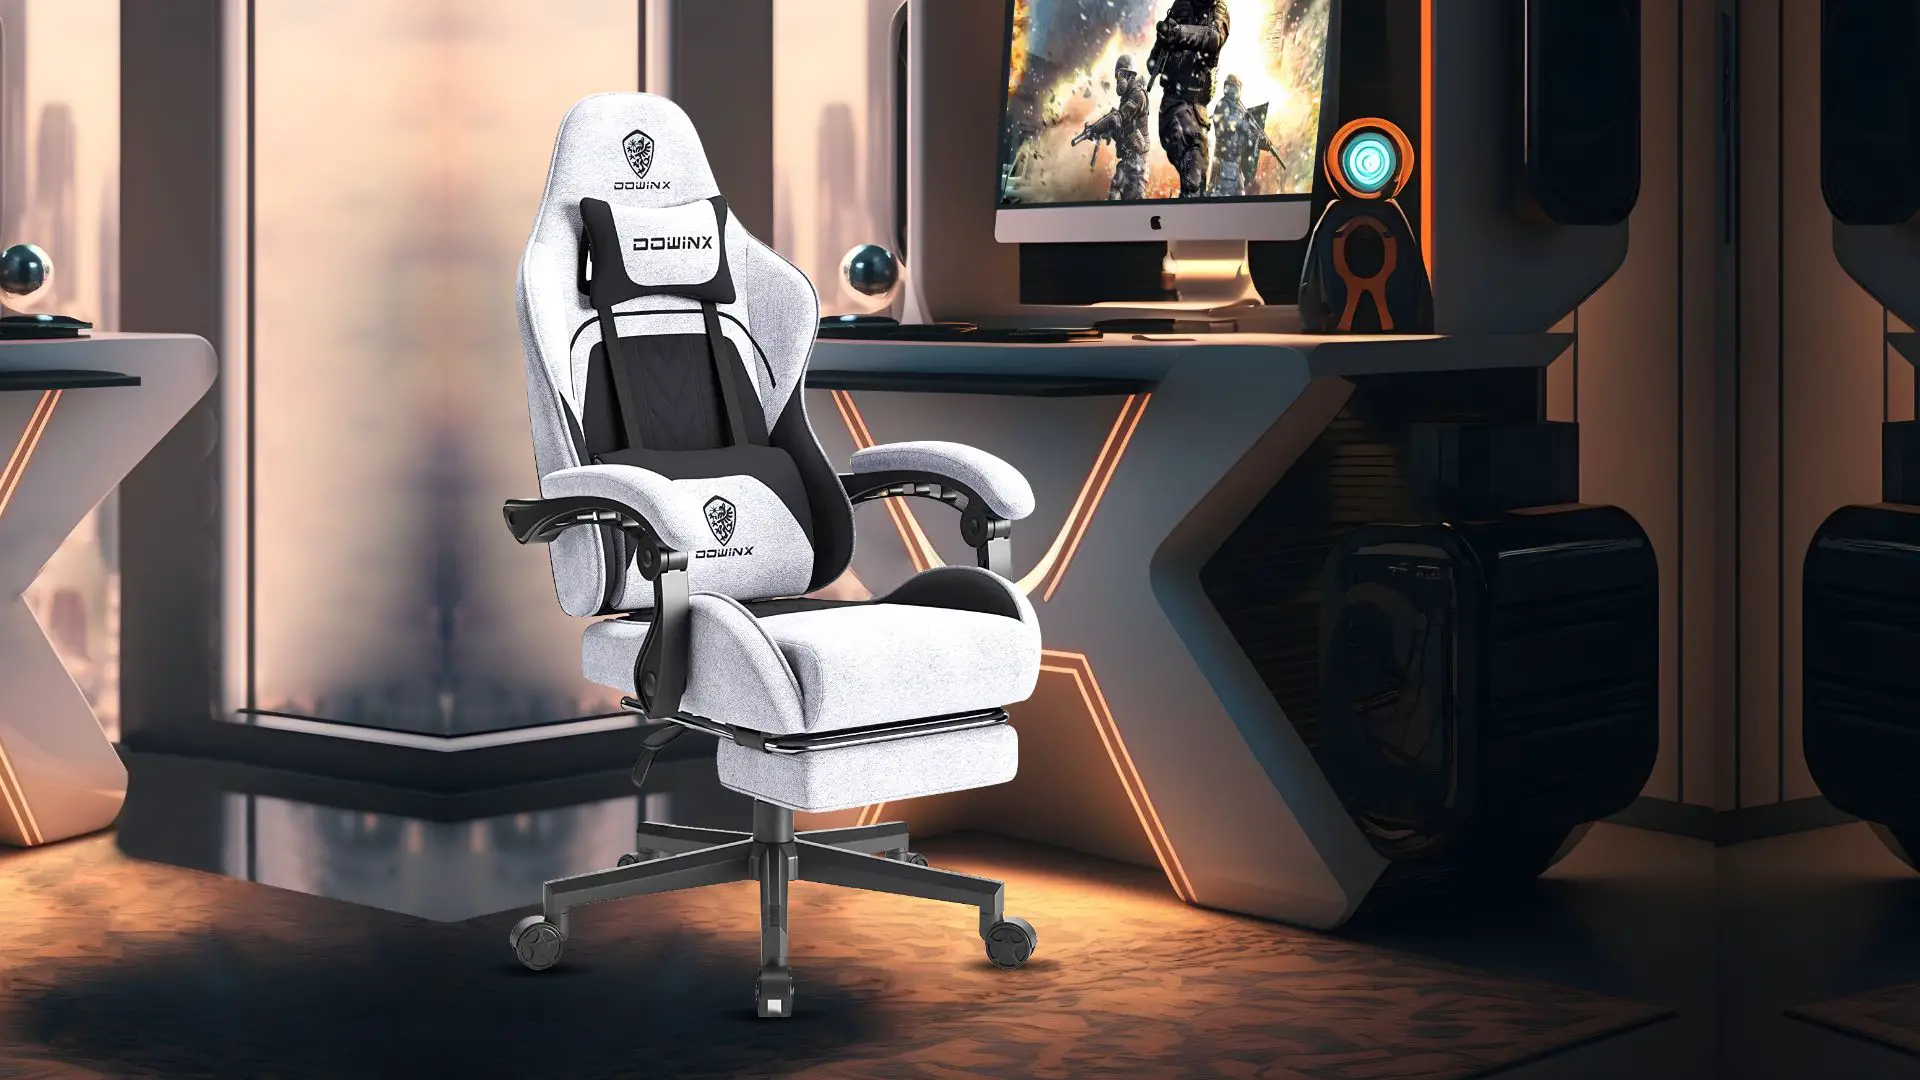 6.Dowinx Gaming Chair